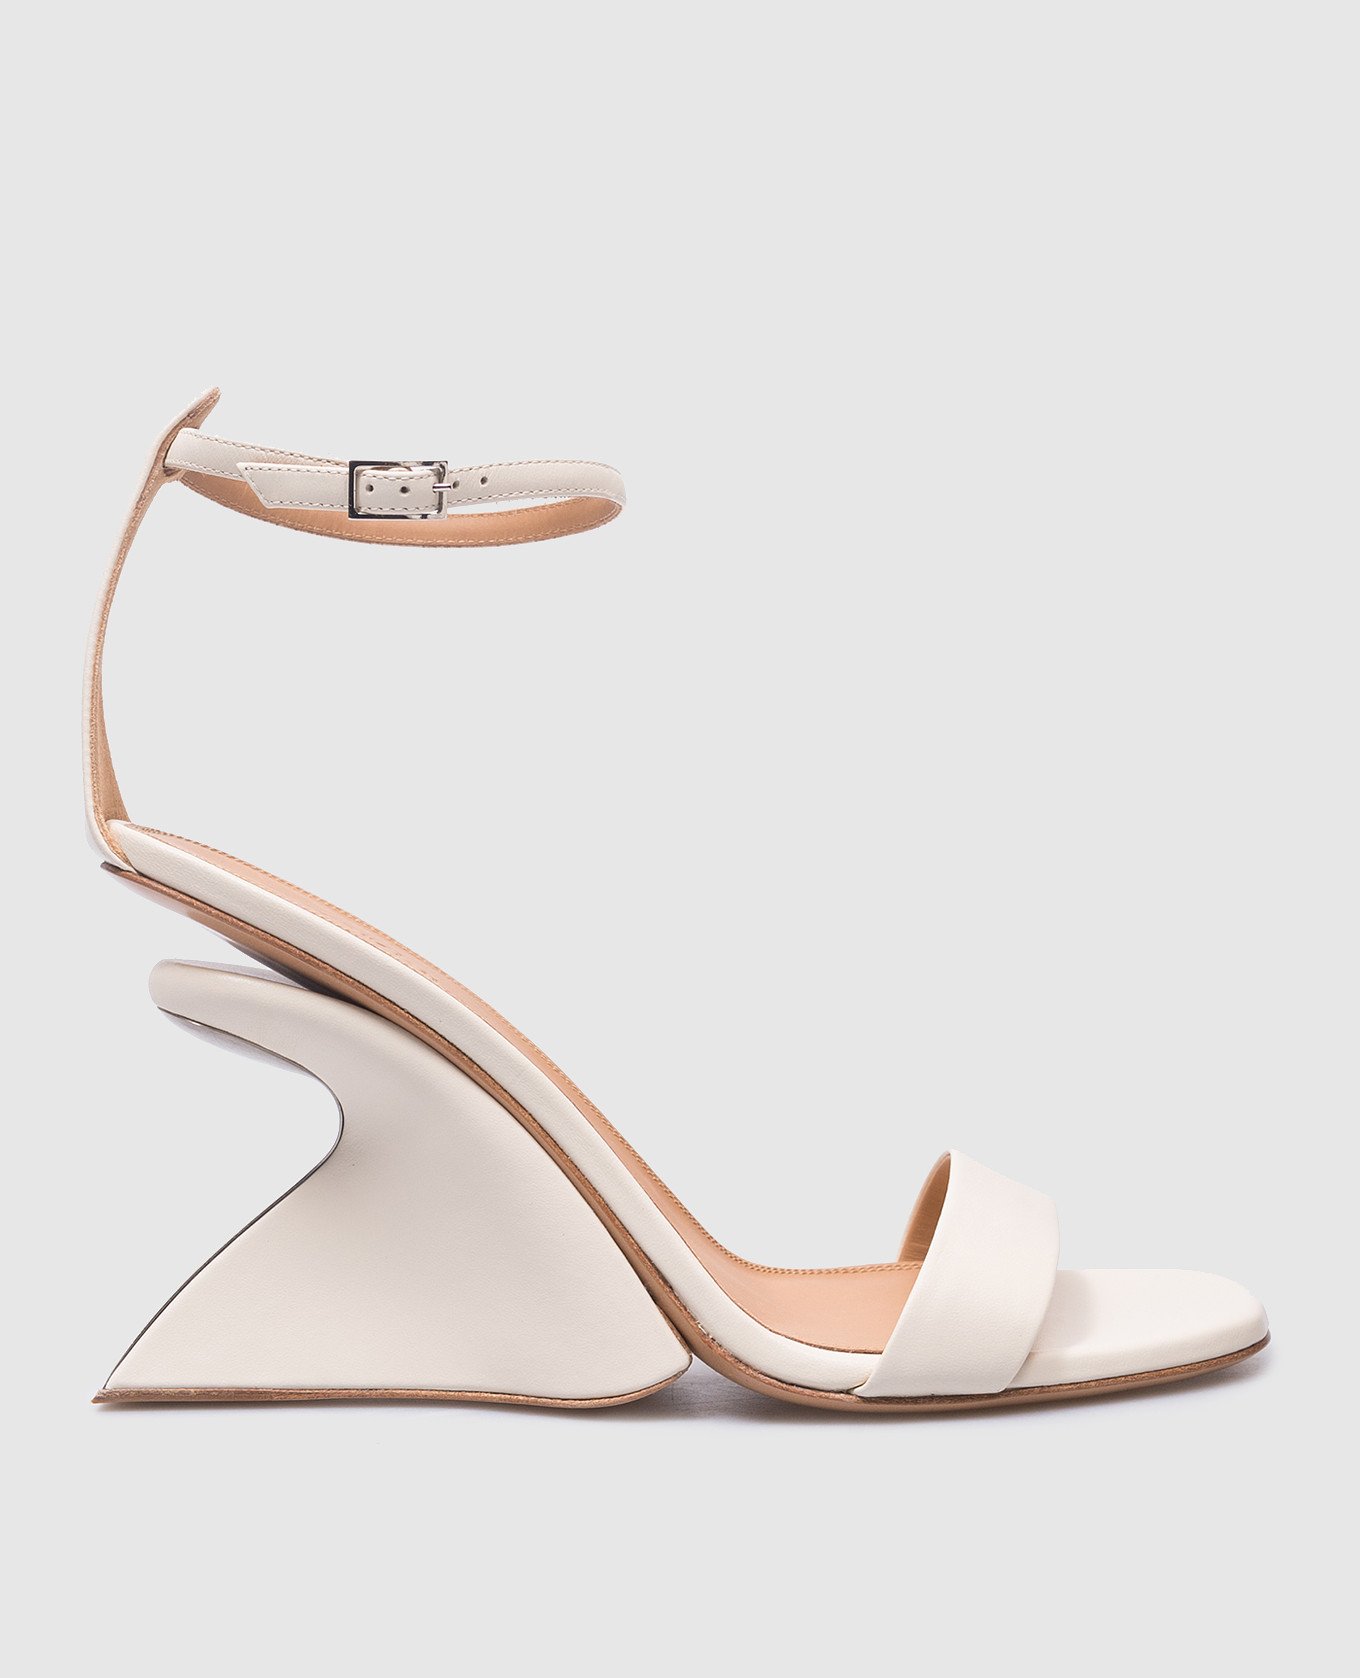 Jug beige leather sandals with curved heels